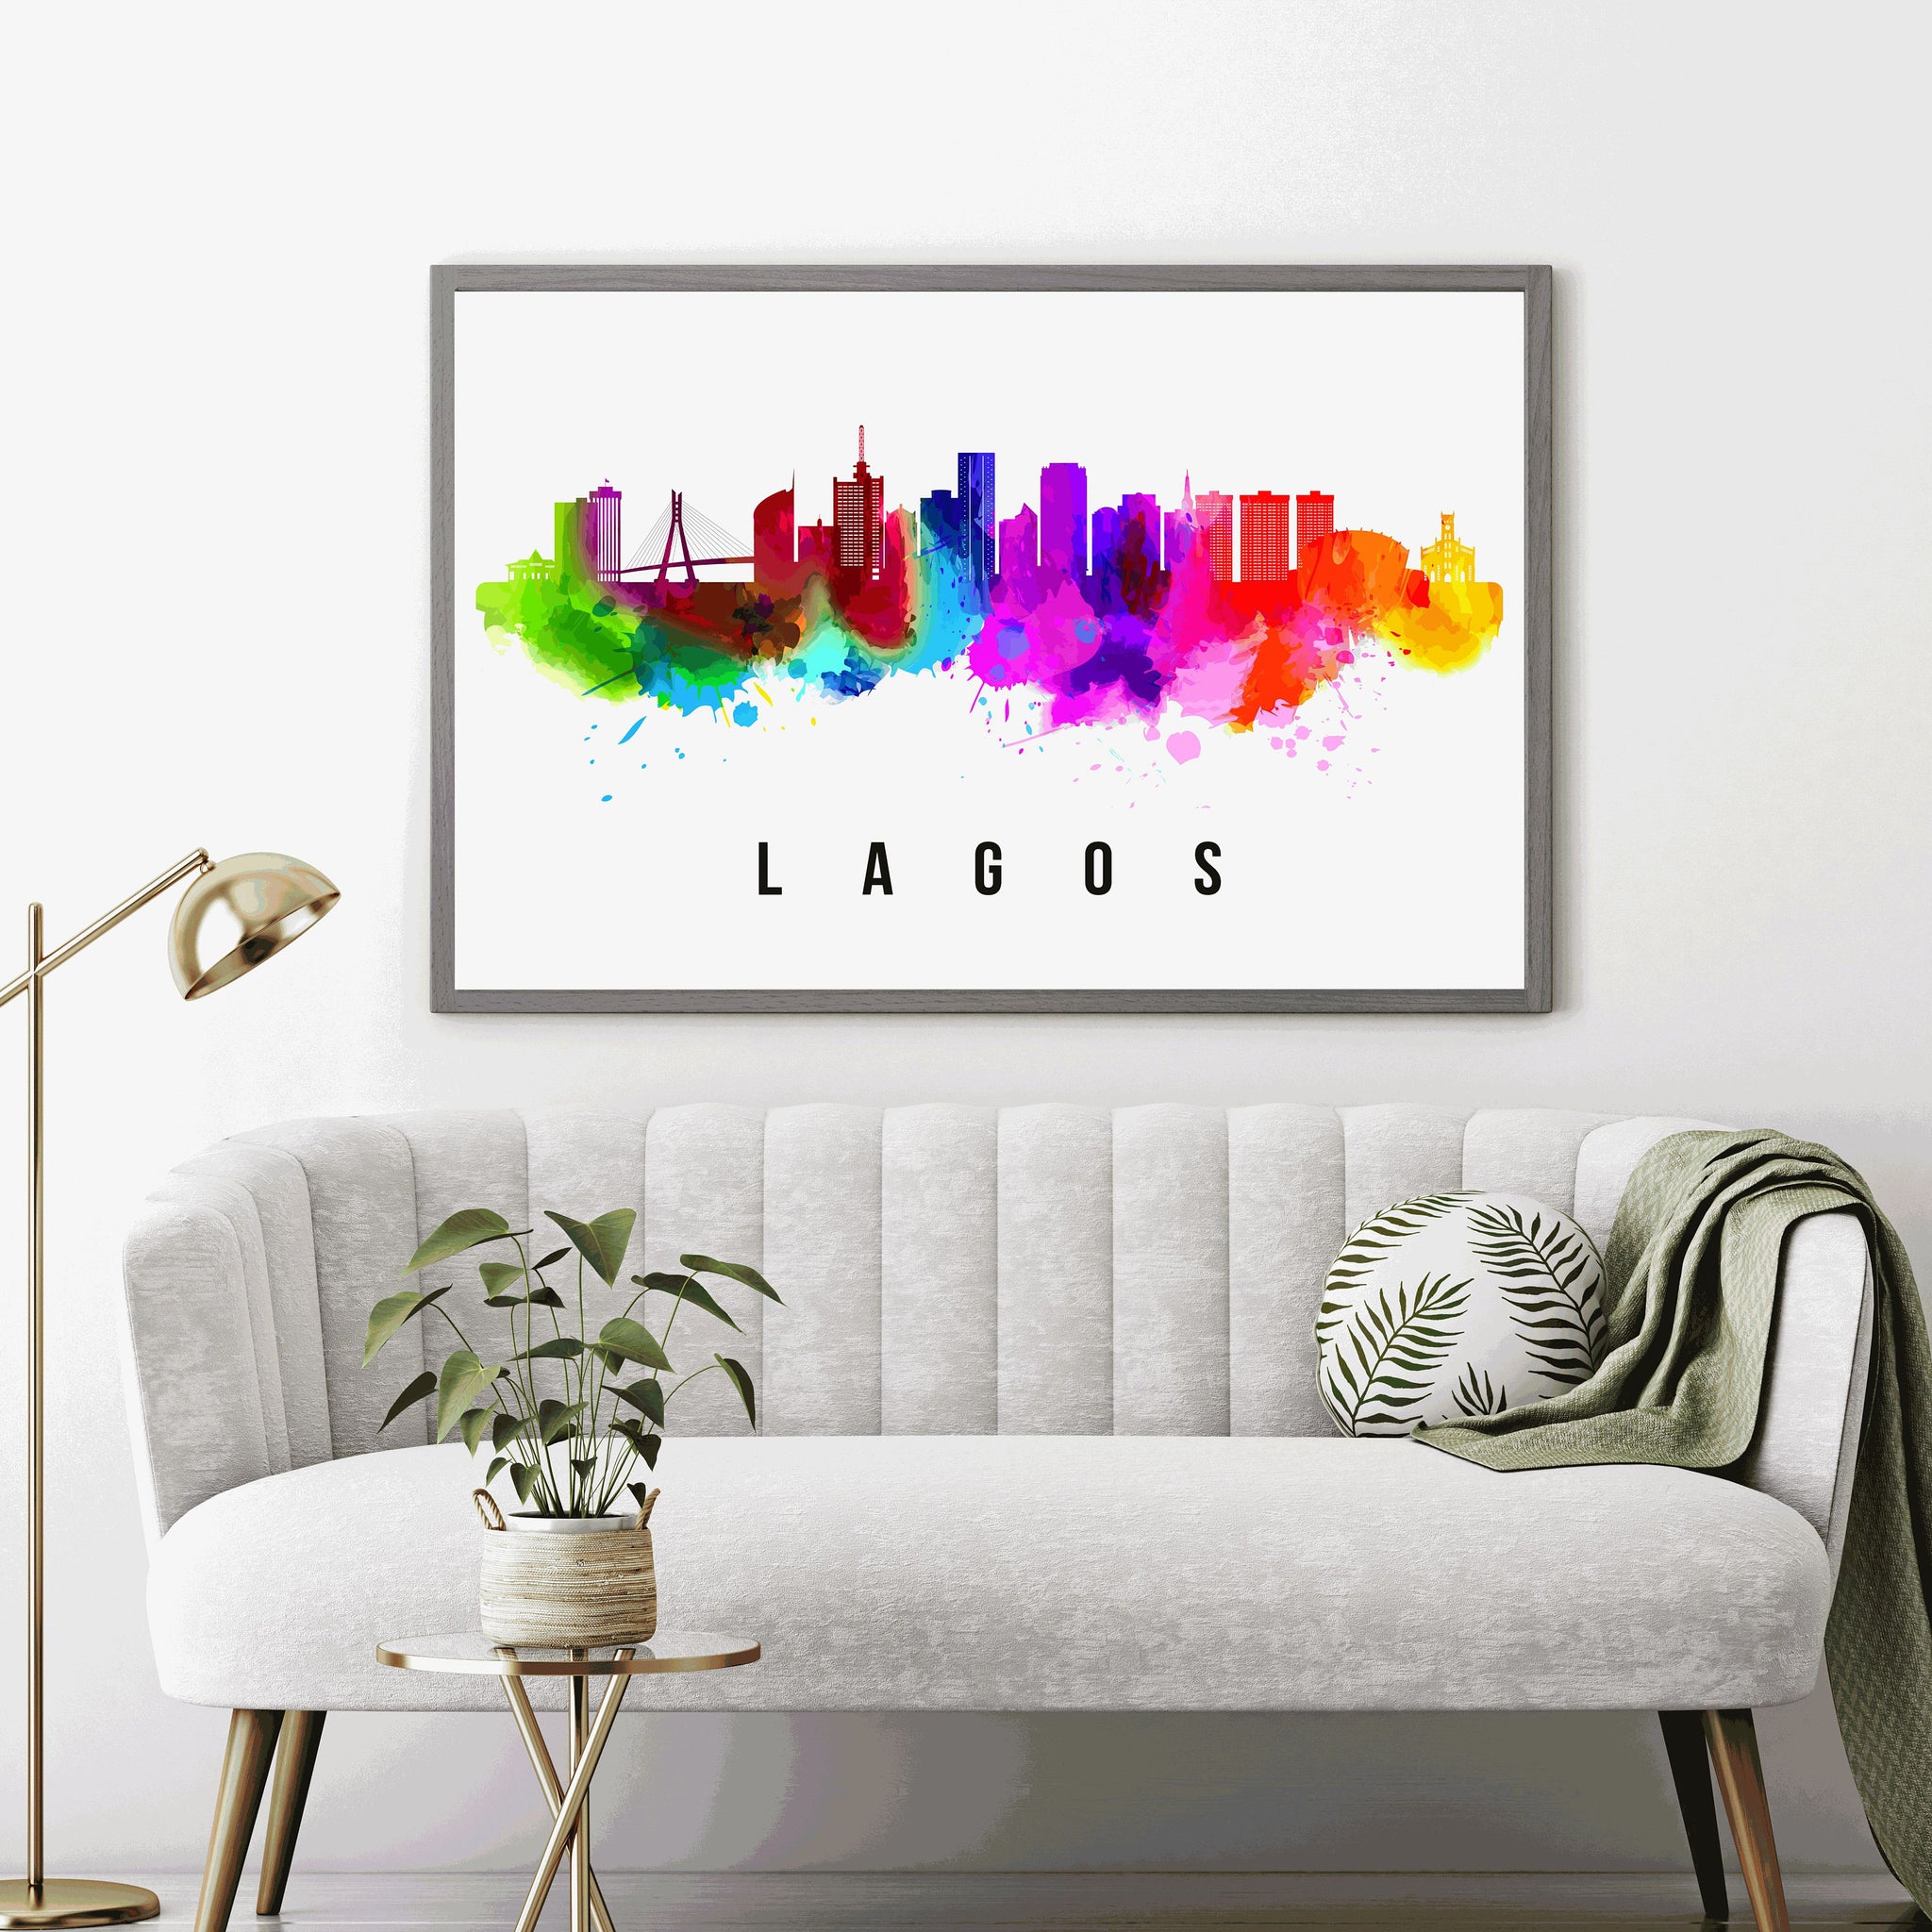 LAGOS - SOUTH AFRICA Poster,  Skyline Poster Cityscape and Landmark Print, Lagos Illustration Home Wall Art, Office Wall Decor